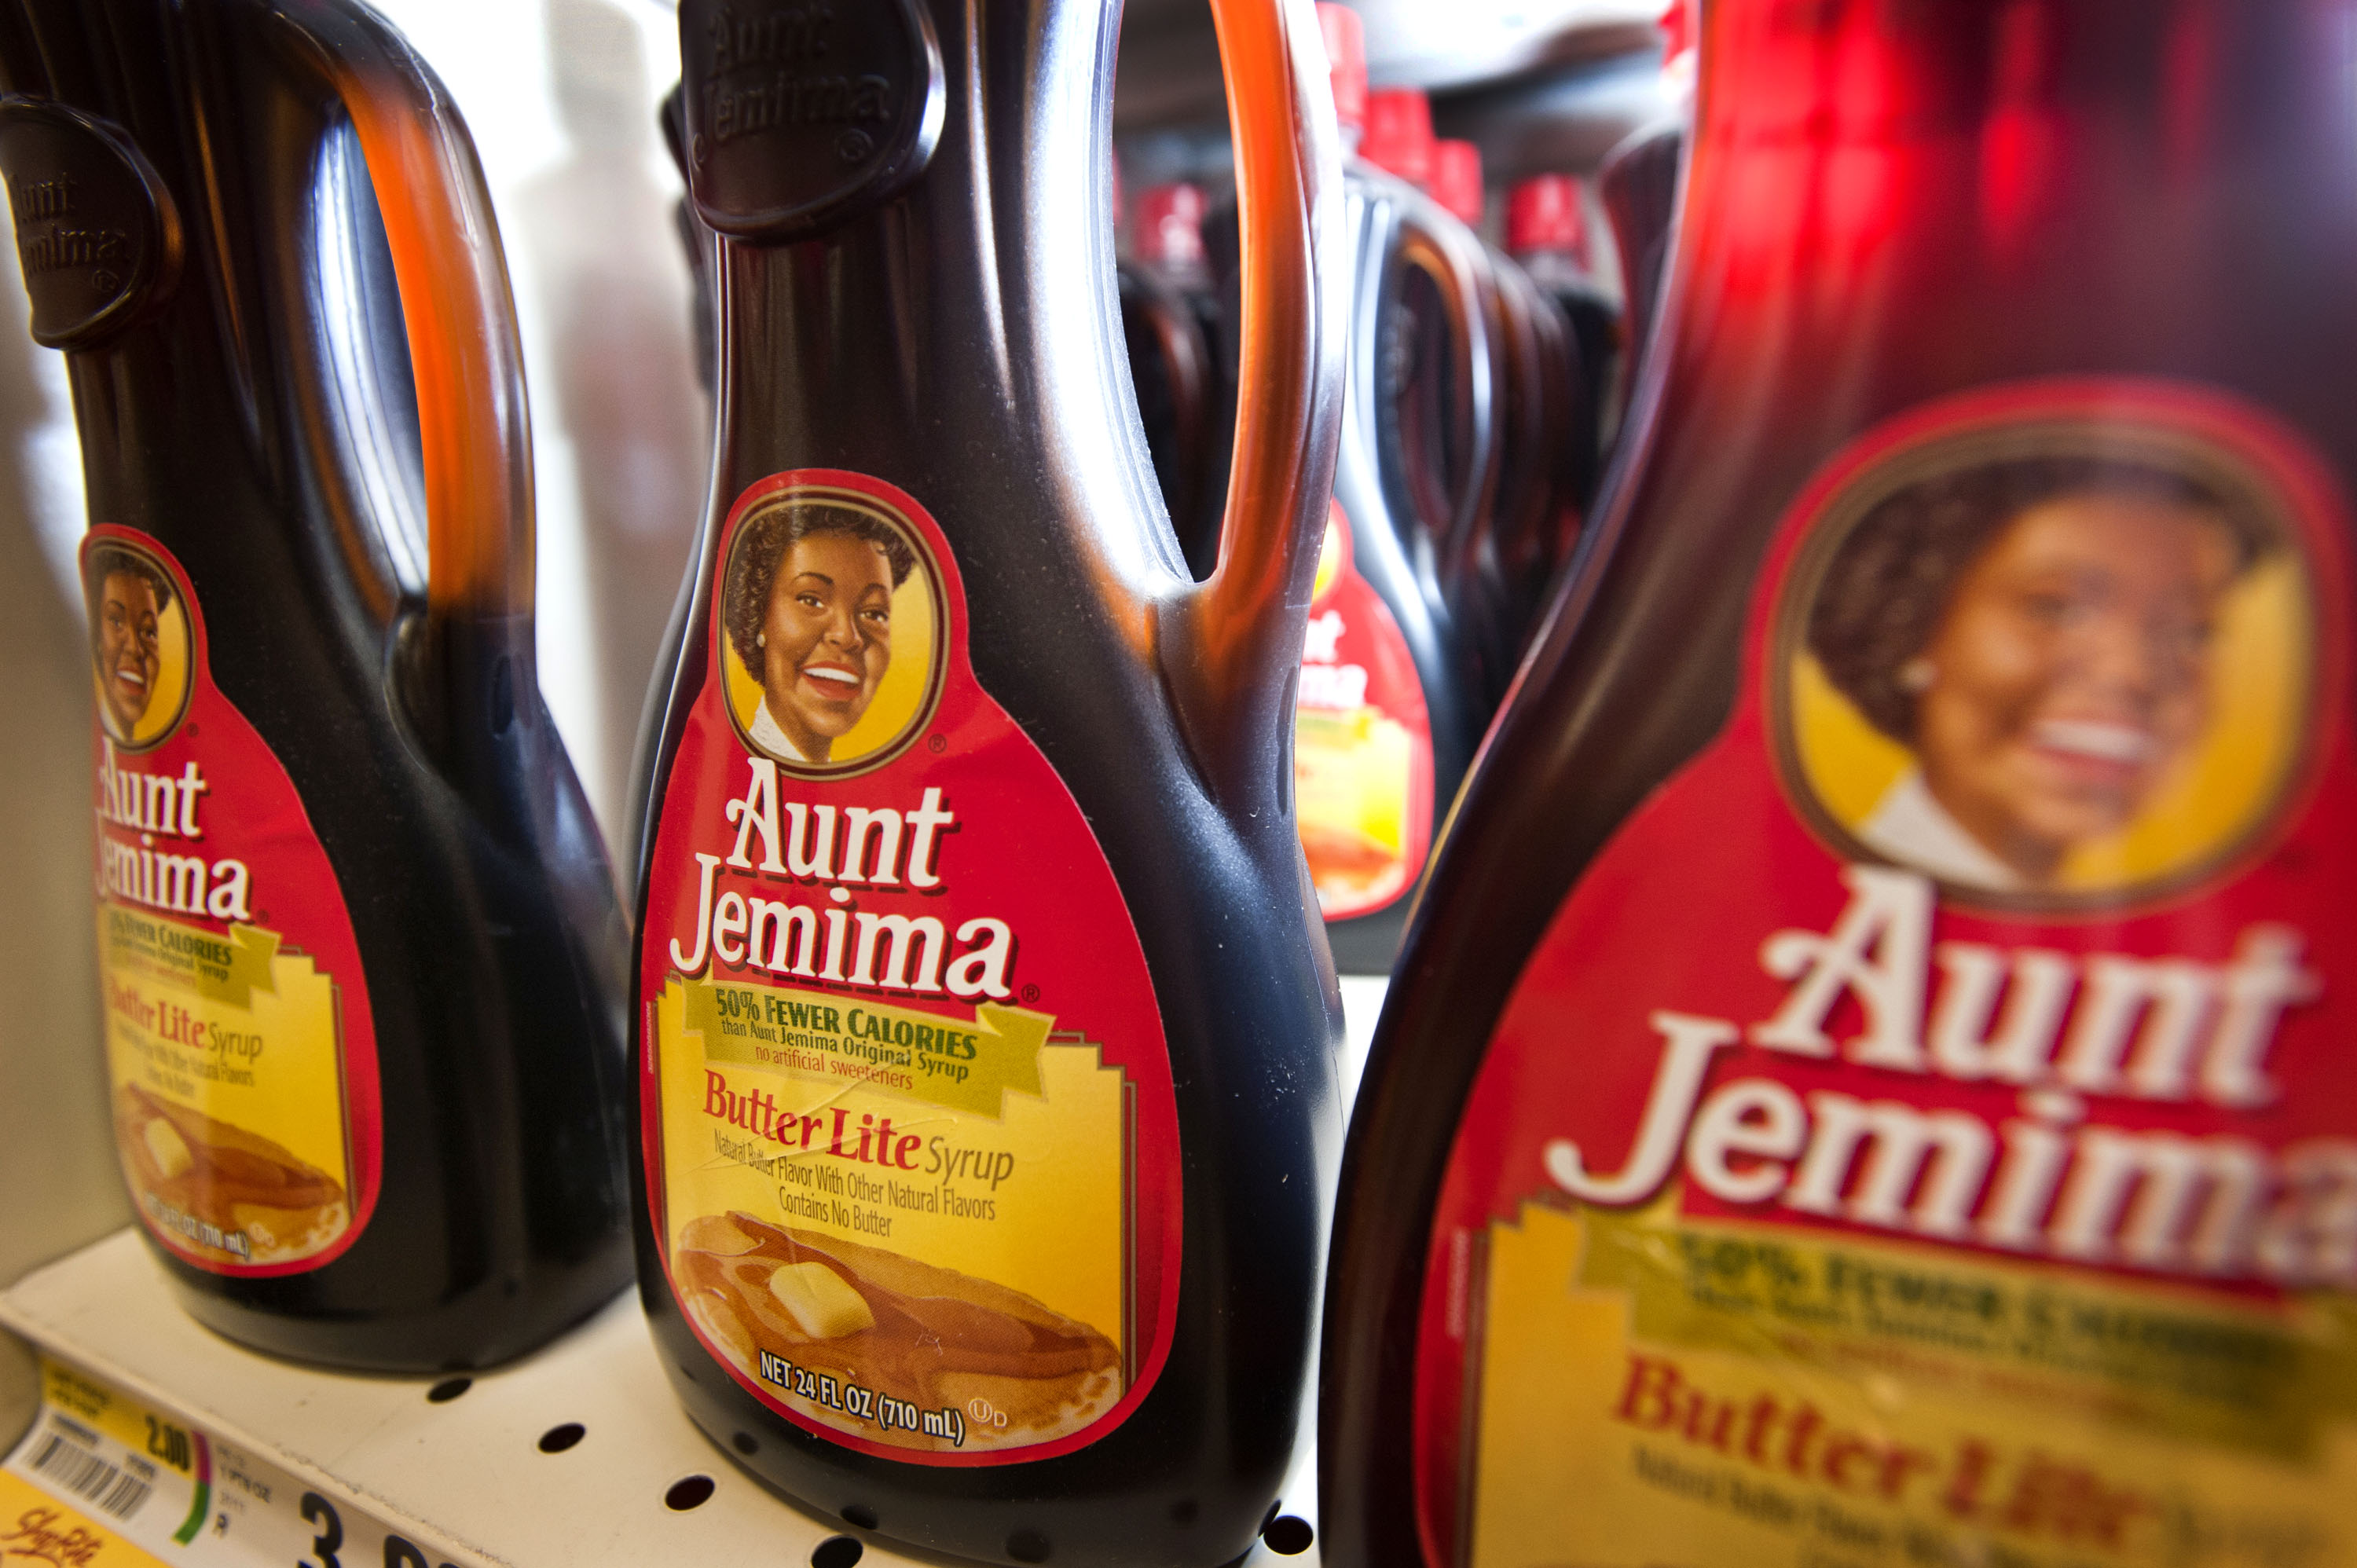 Bottles of Aunt Jemima syrup are displayed for sale at a ShopRite Holdings Ltd. grocery store in Stratford, Connecticut, on Aug. 3, 2011. (Paul Taggart—Bloomberg/Getty Images)